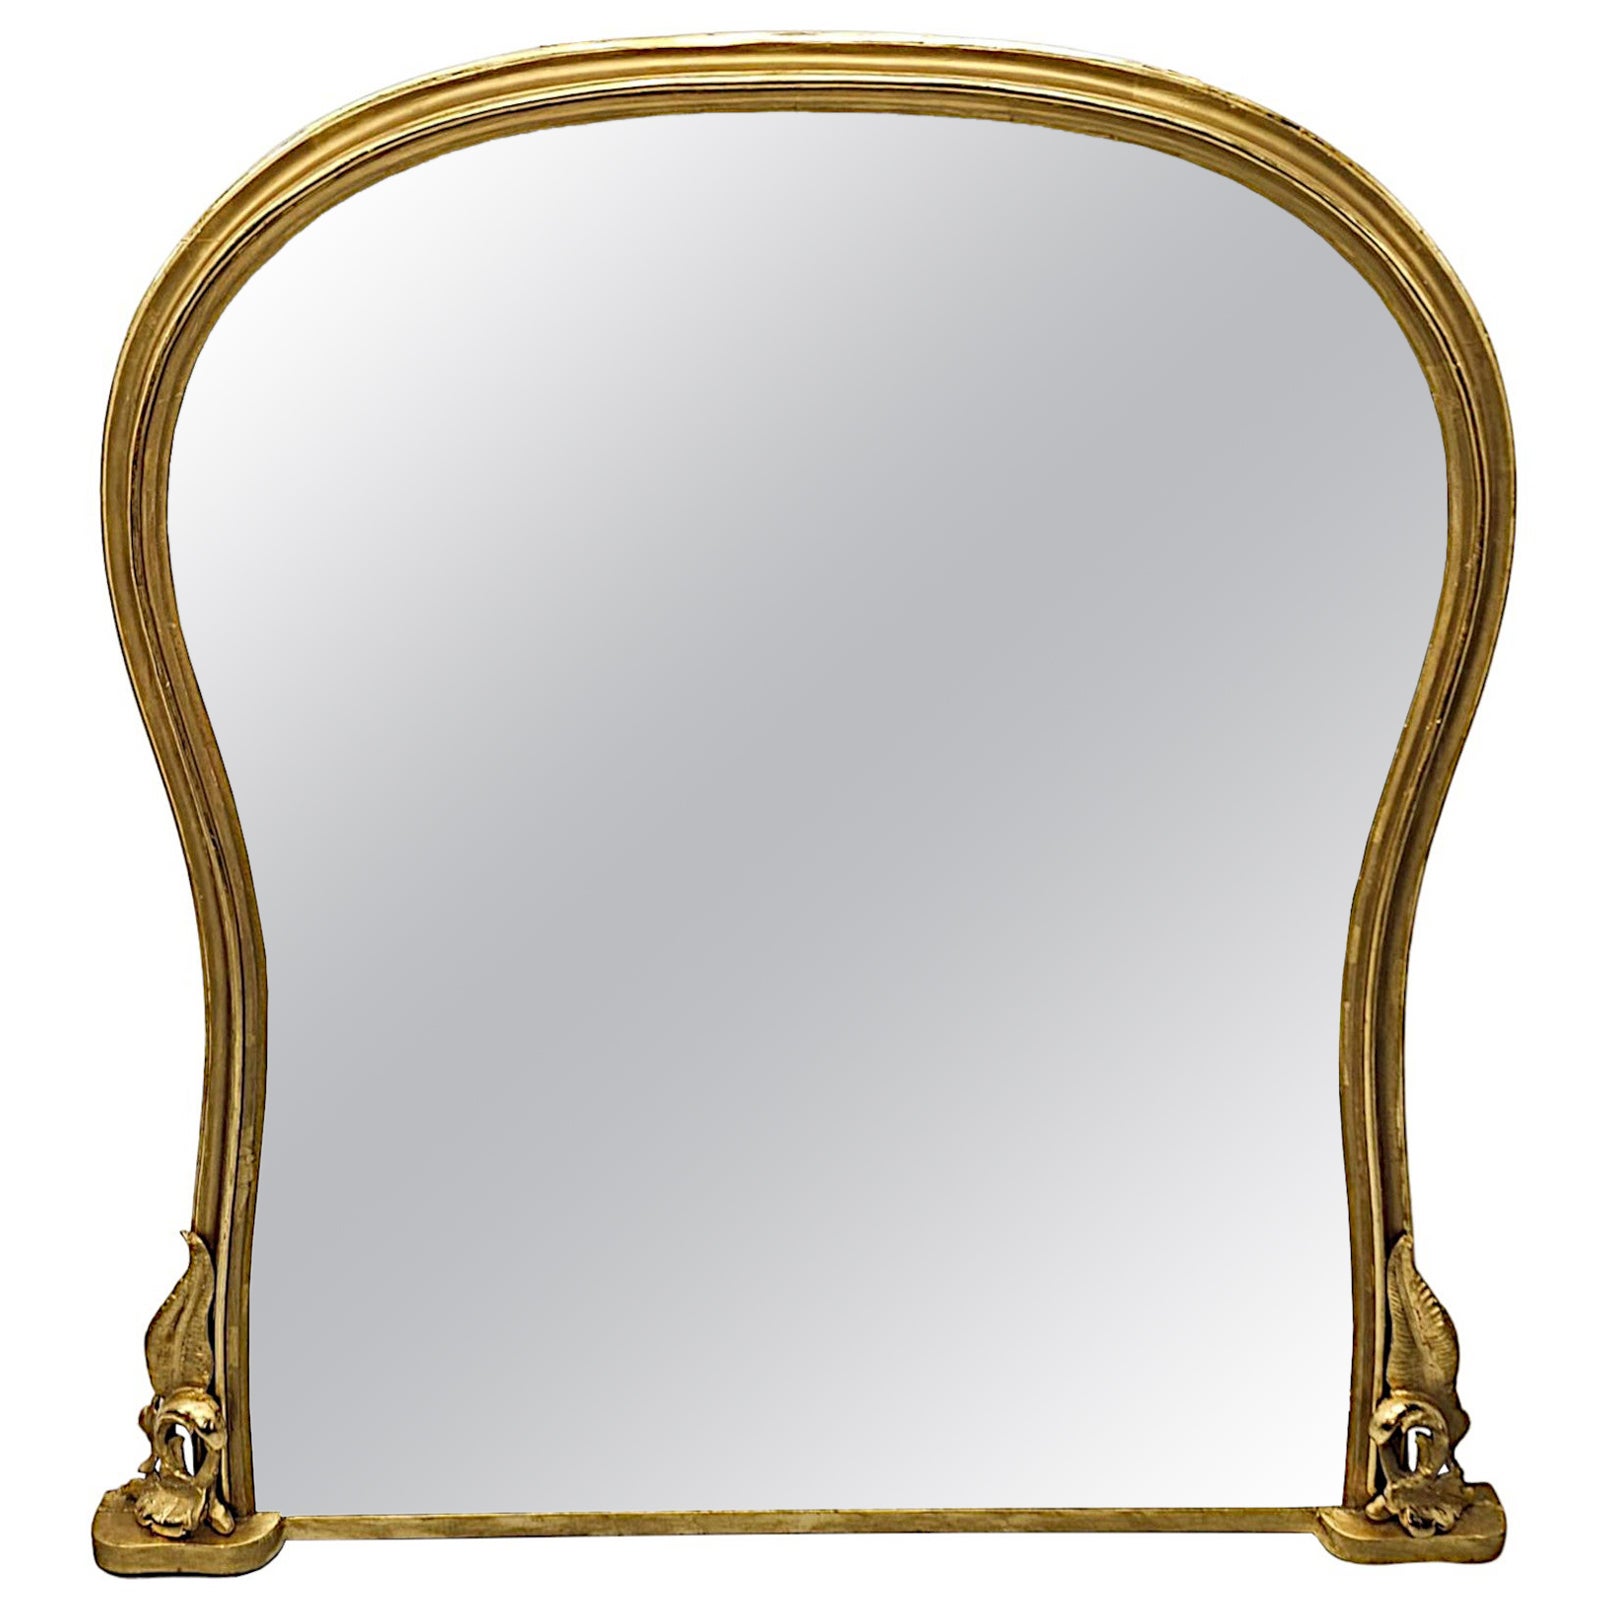  A Very Fine Large 19th Century Waisted Archtop Giltwood Overmantel Mirror For Sale